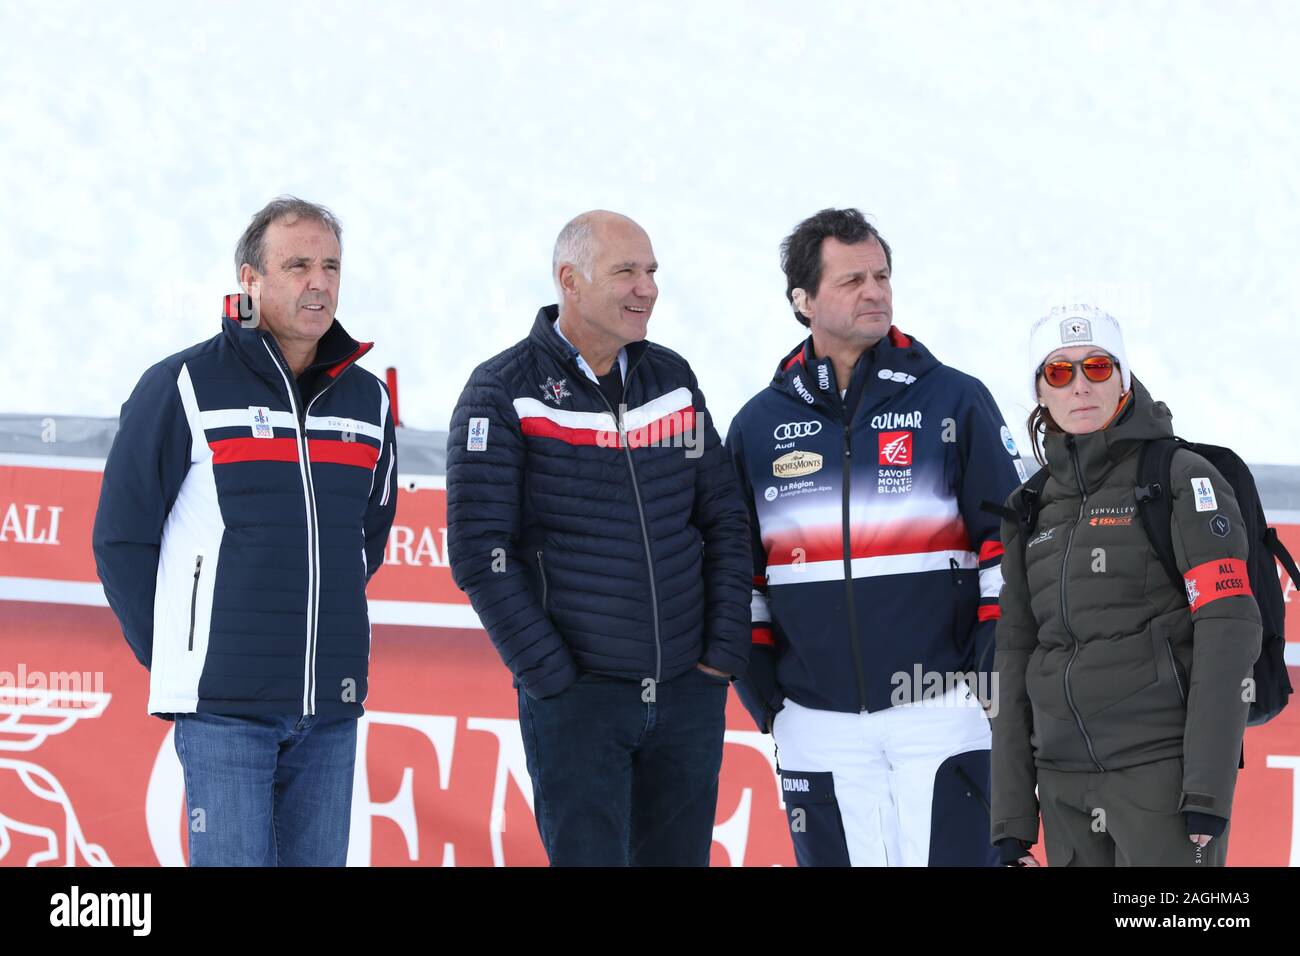 Courchevel, France - French Ski Federation at the end of women's giant slalom  event valid for the Audi FIS Alpine Ski World Cup 2019/20 Stock Photo